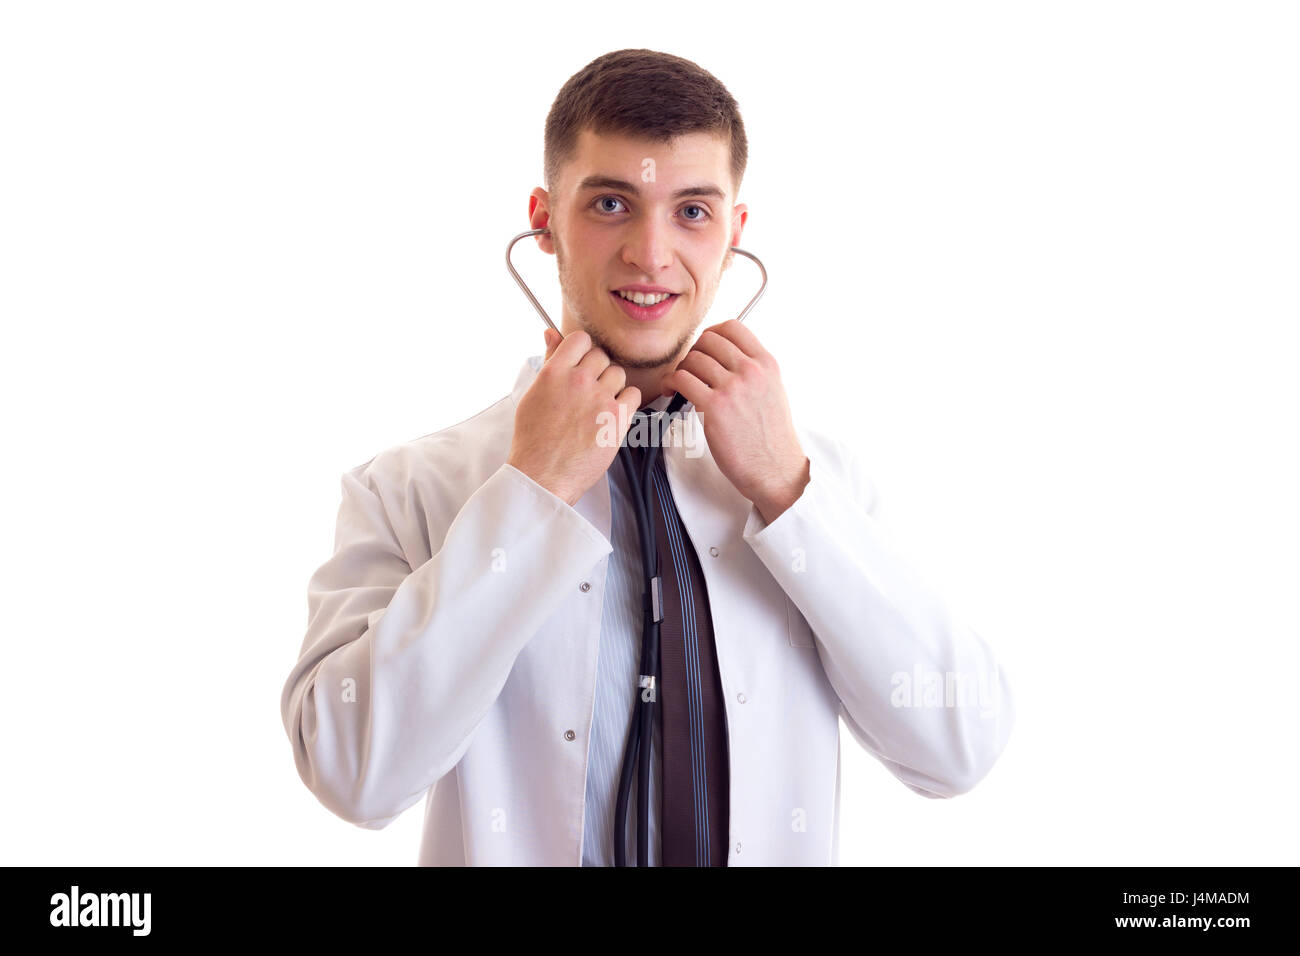 Young man in doctor gown Stock Photo